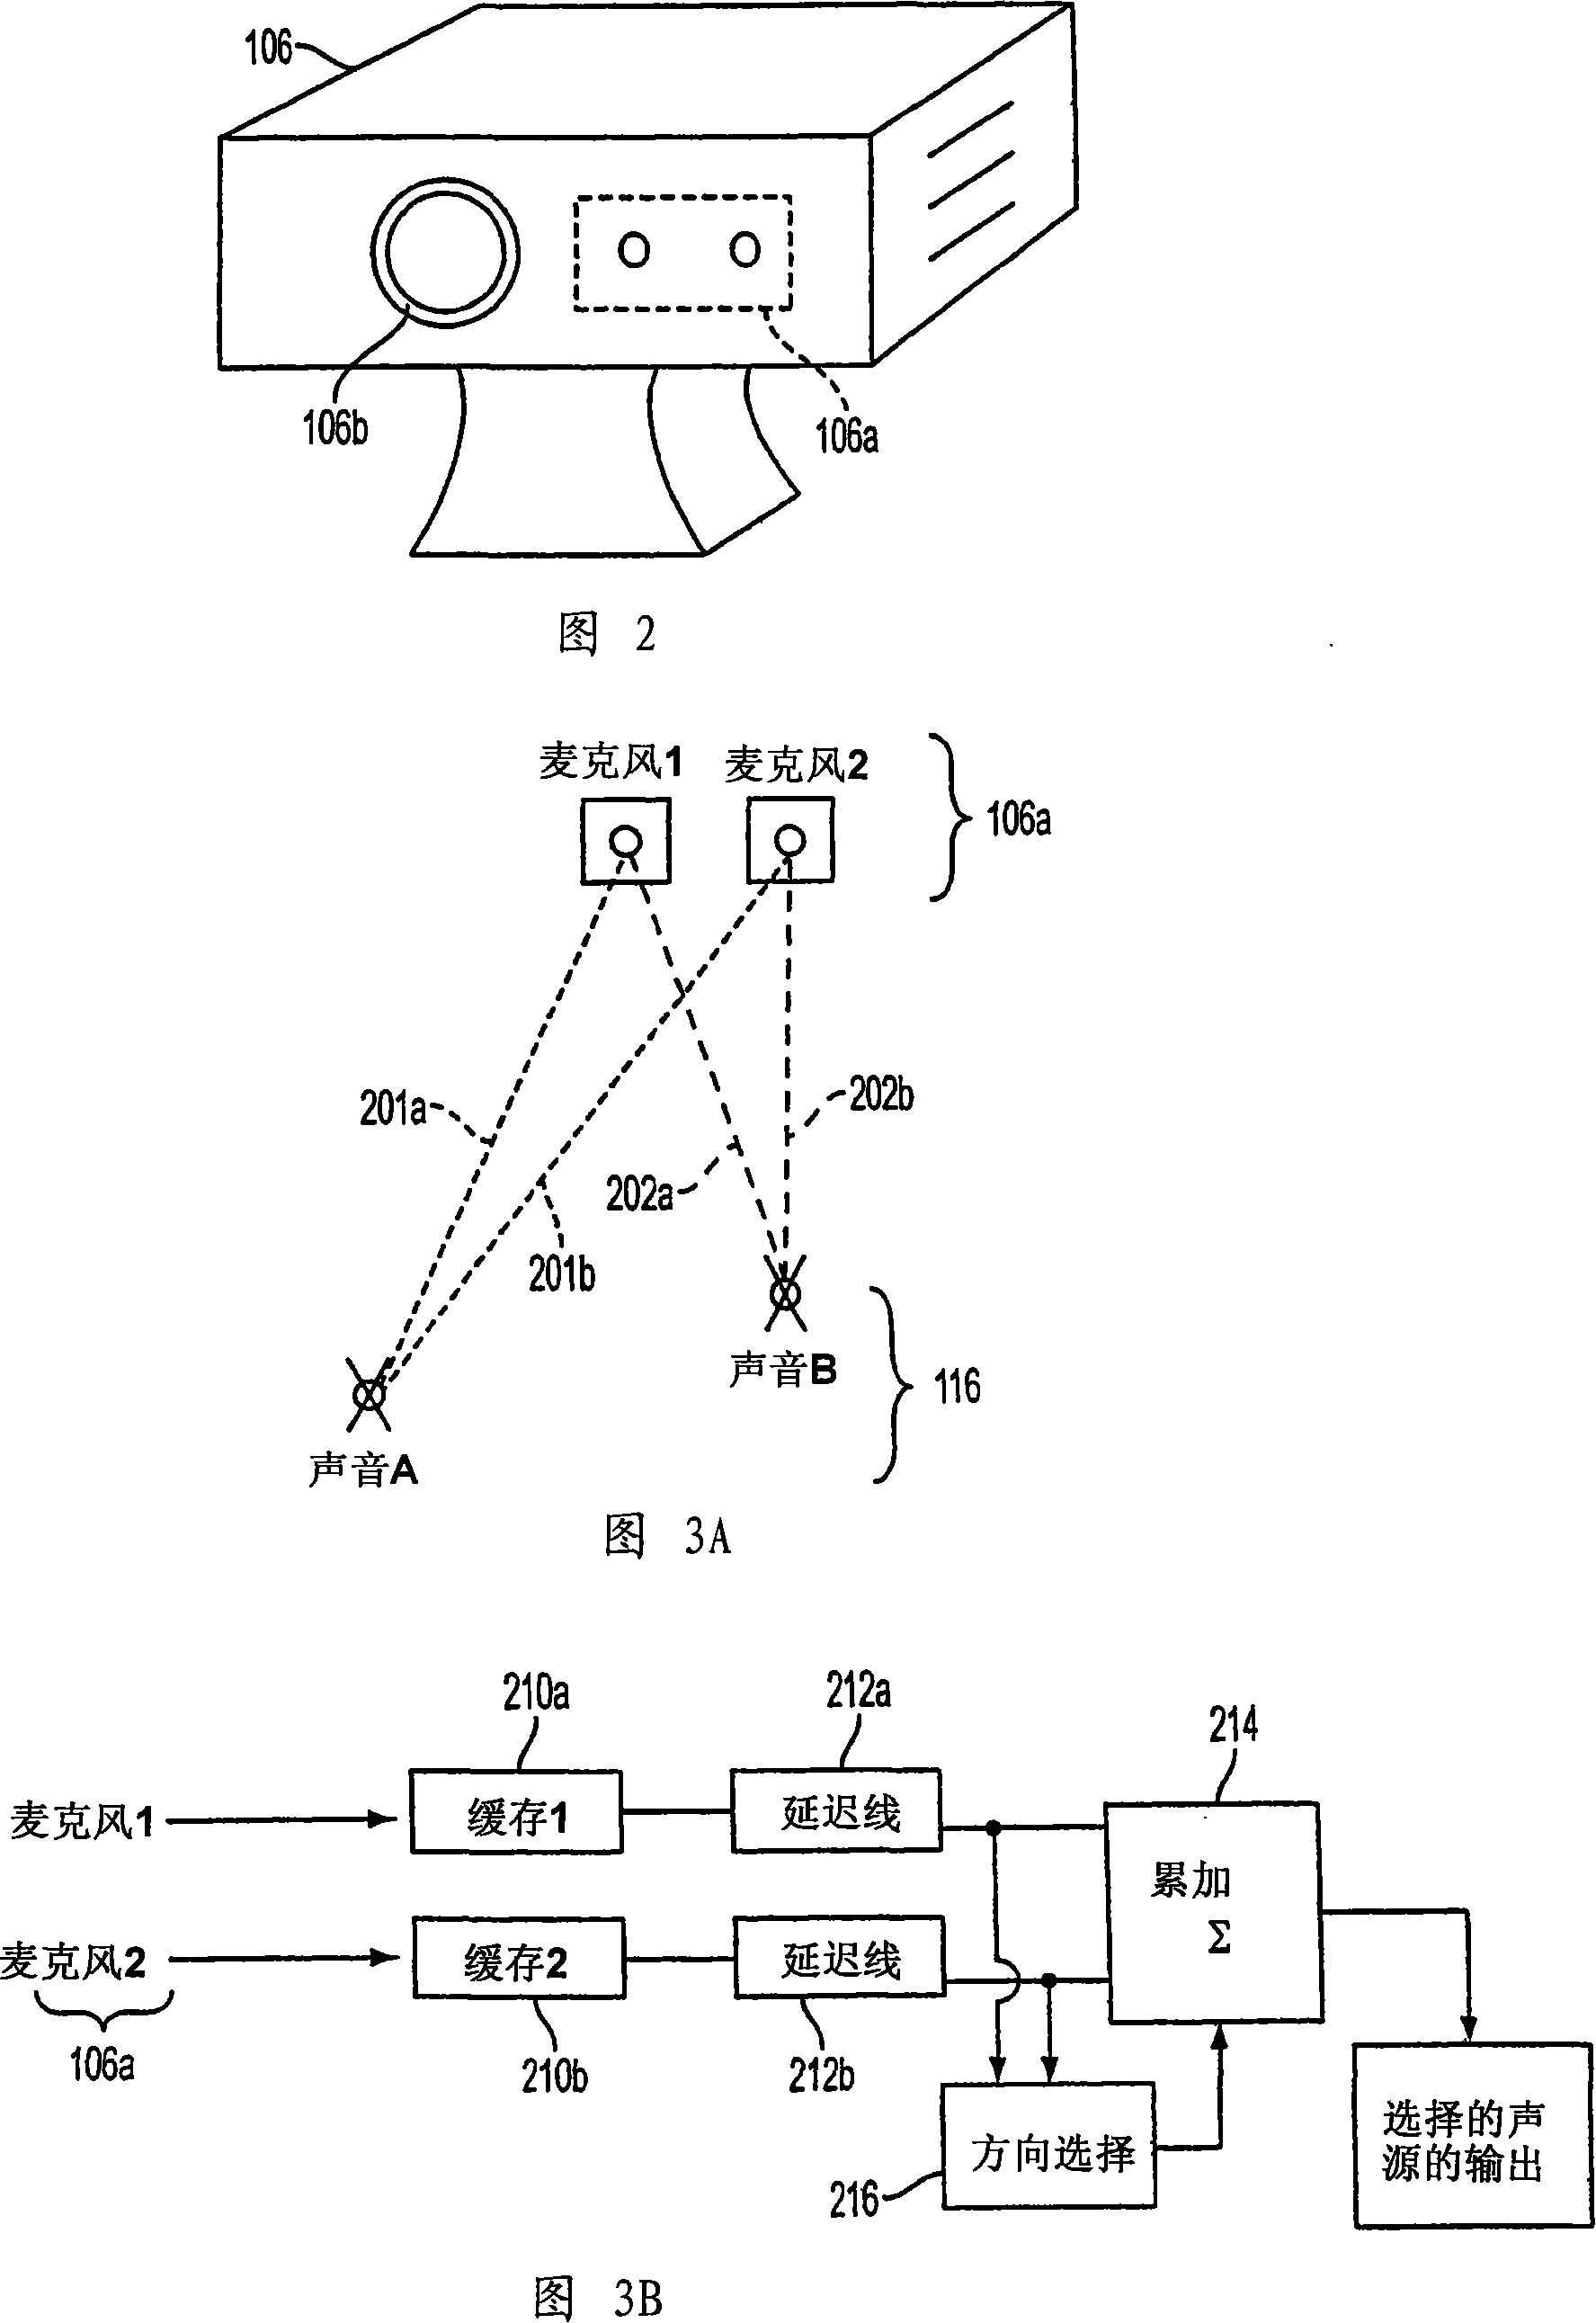 Selective sound source listening in conjunction with computer interactive processing